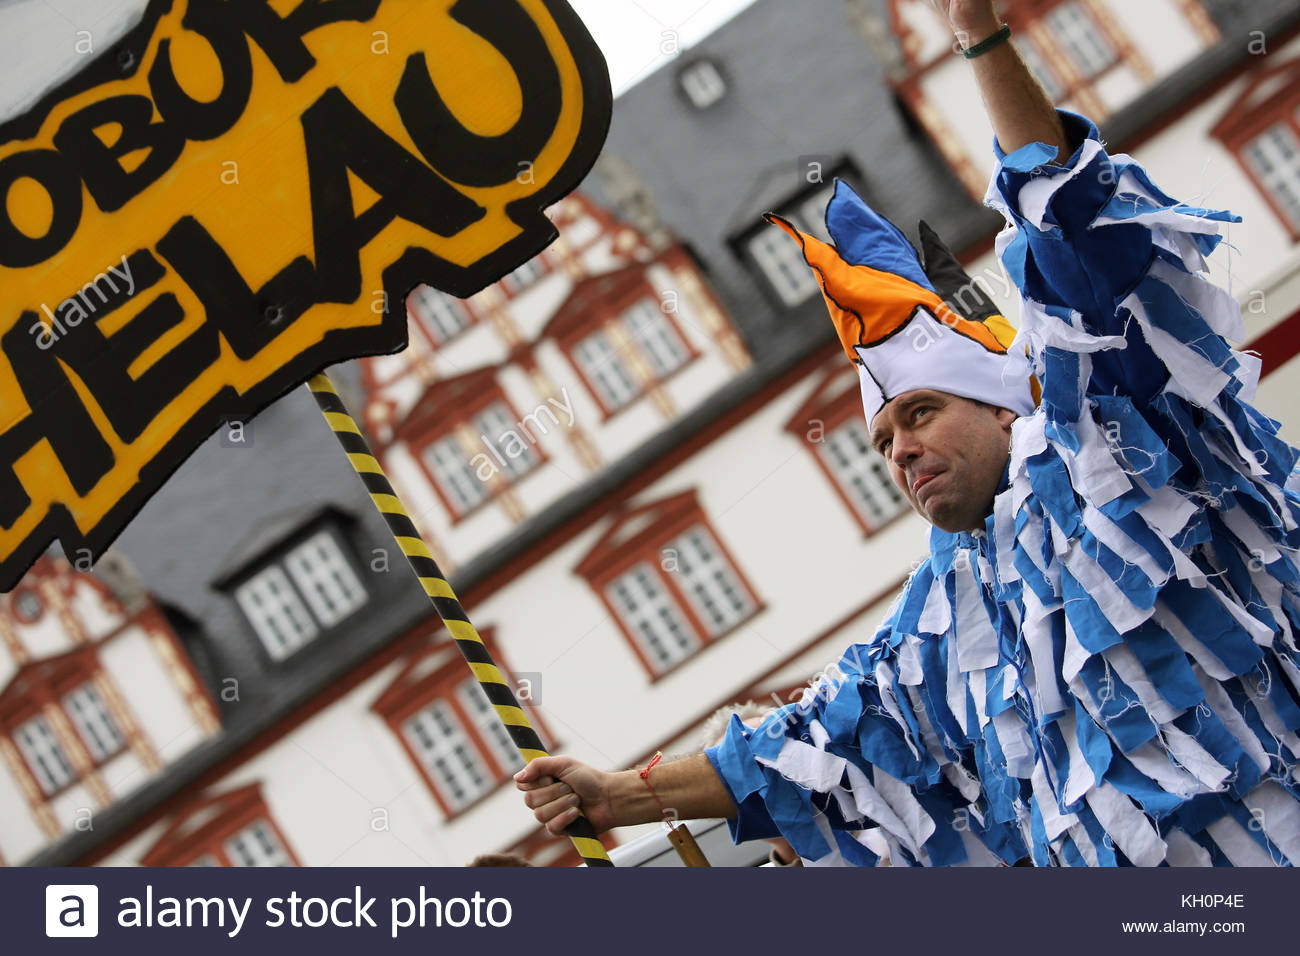 Coburg, Germany. 11th Nov, 2017. The jester at the opening ceremony of the Carnival season in Coburg, Germany strikes a pose for the cameras. The eleventh hour of the eleventh day of the eleventh month is the official opening time of Carnival in Germany, an age old custom that reaches its climax in February. Credit: reallifephotos/Alamy Live News Stock Photo